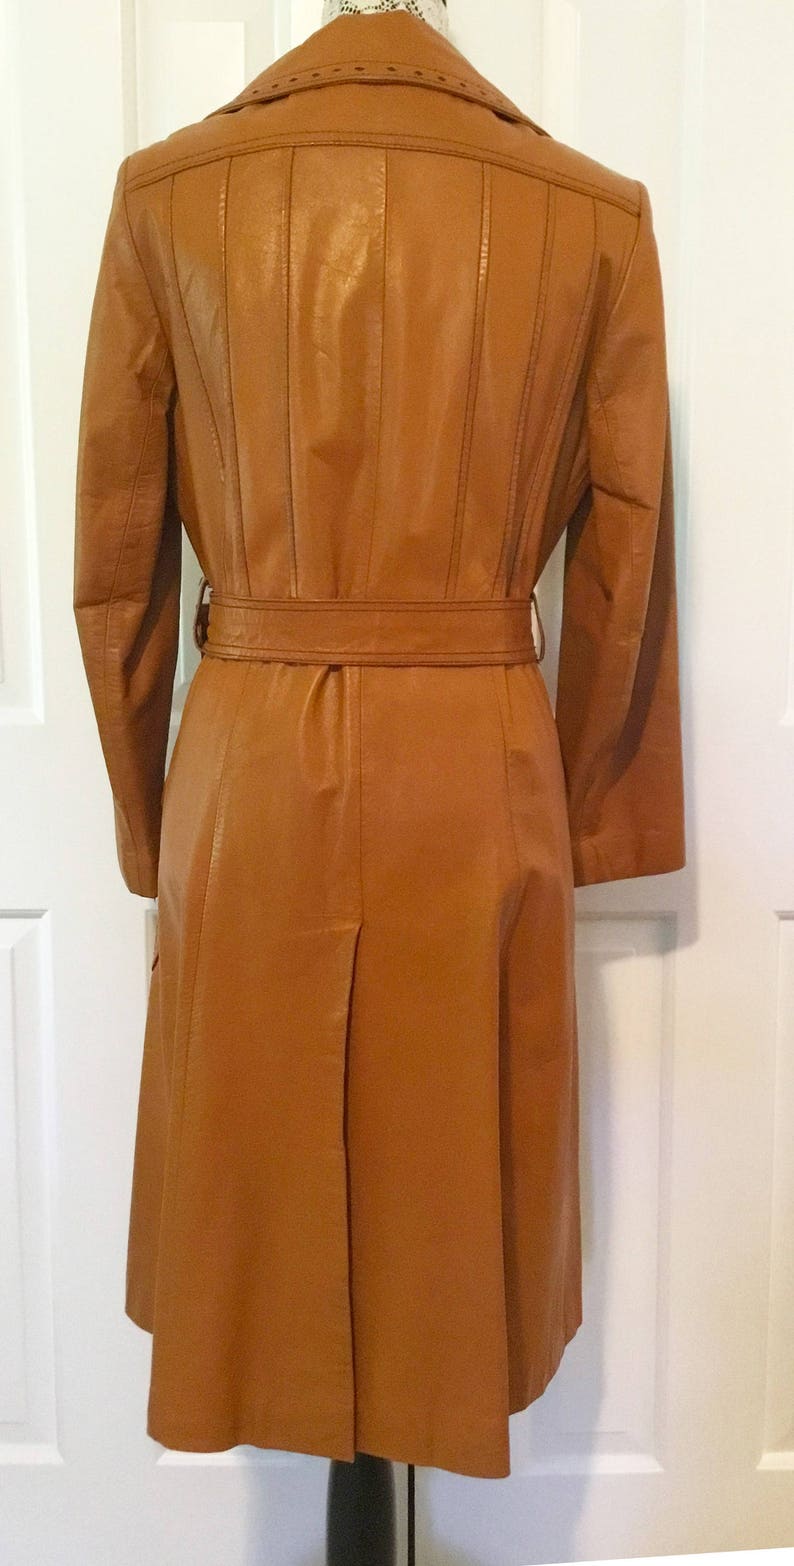 1970's Brown Leather Trench Coat | Etsy